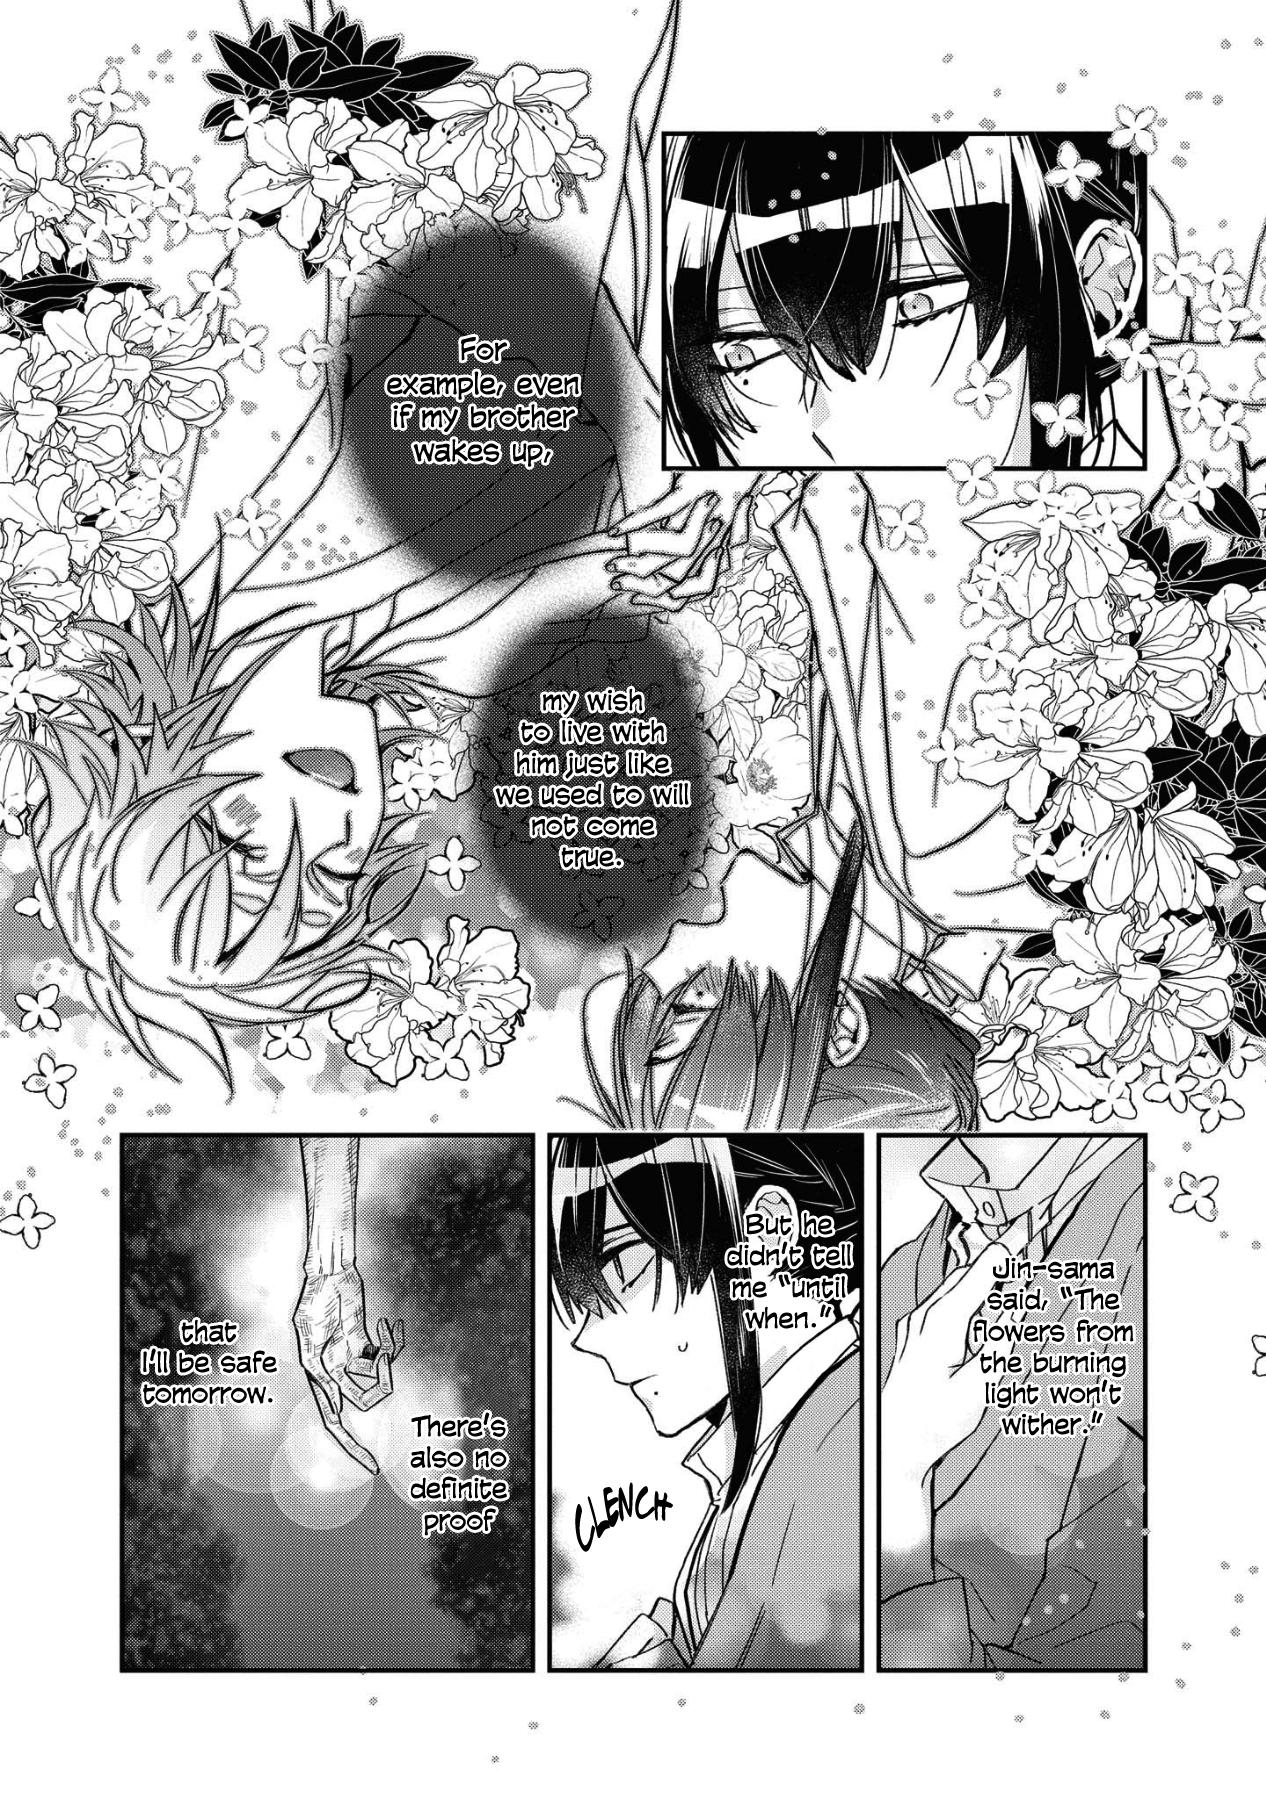 White Of A Wedding Ceremony - Page 2